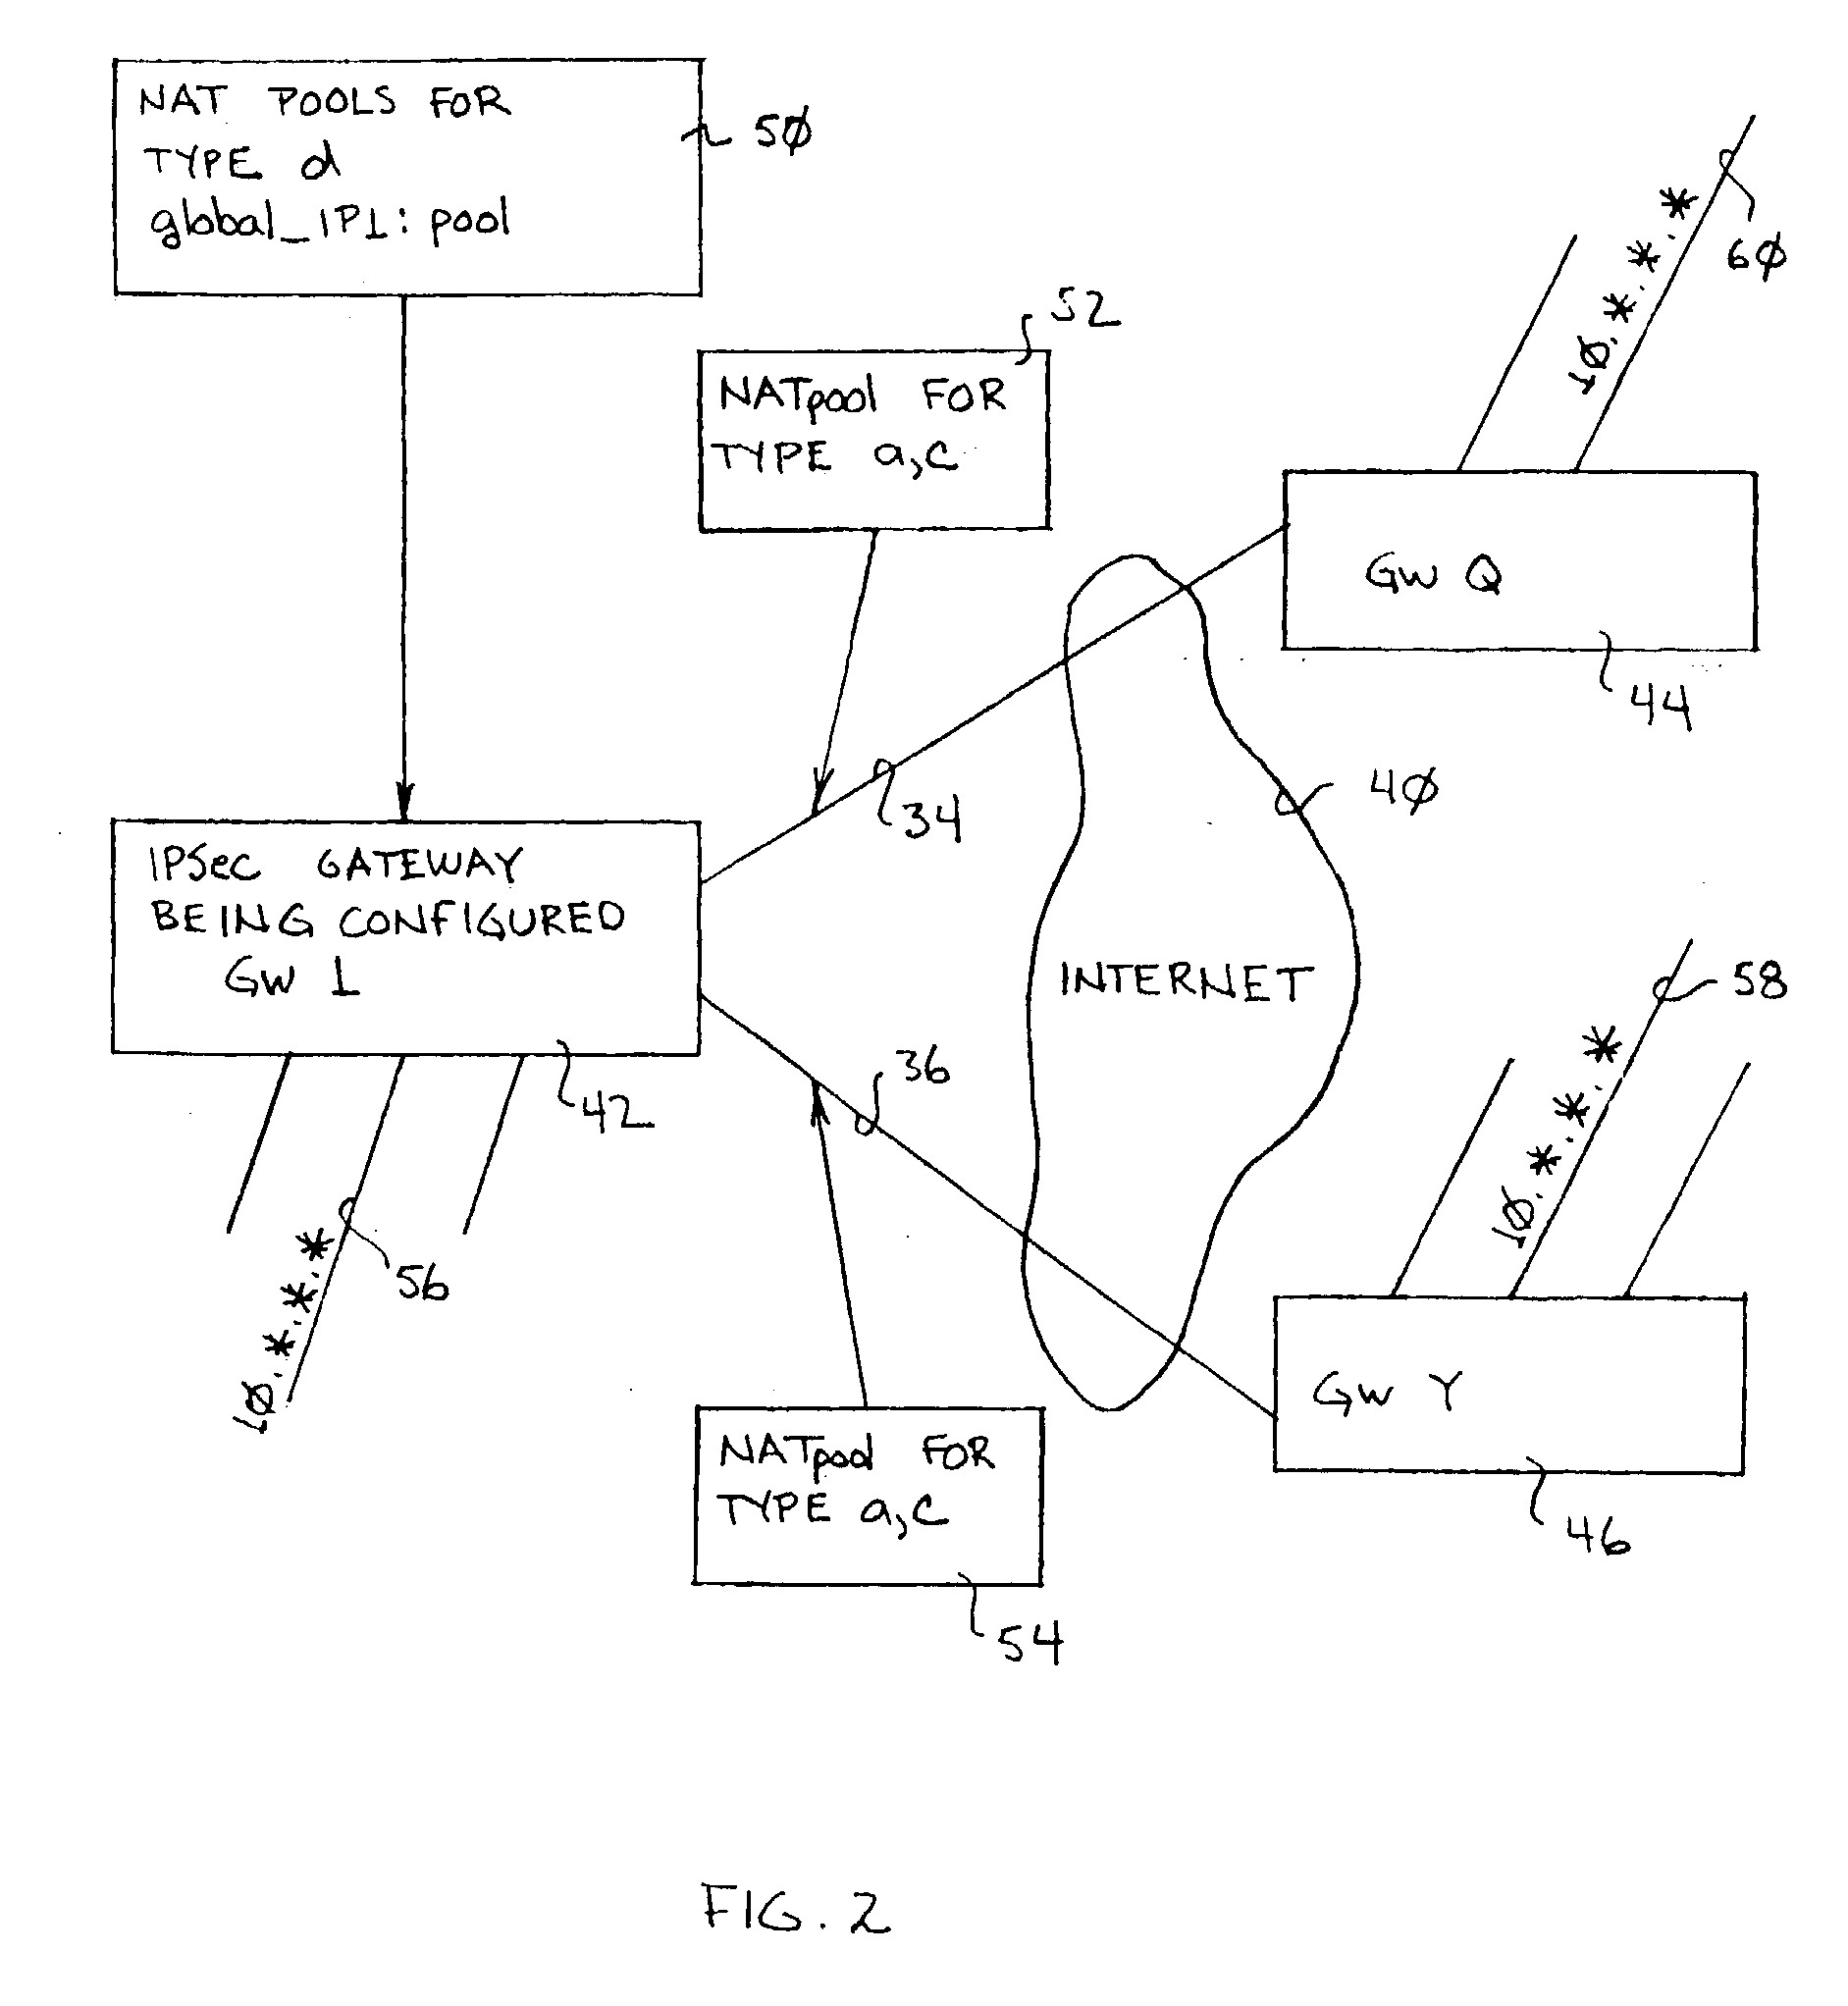 System and method for network address translation integration with IP security